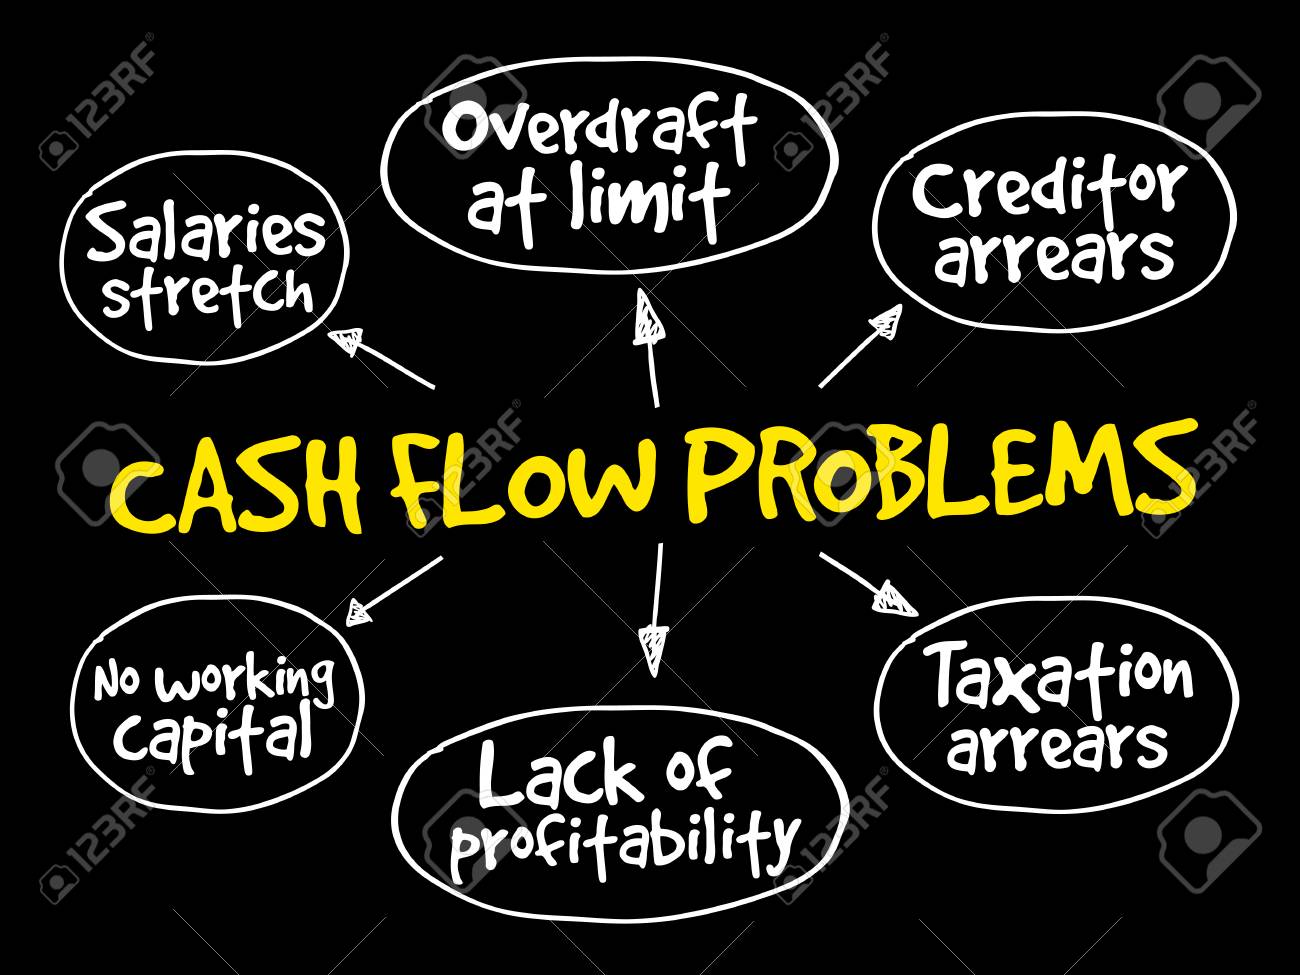 Five Top Tips Business Owners Can Use to Solve Cash Flow Problems